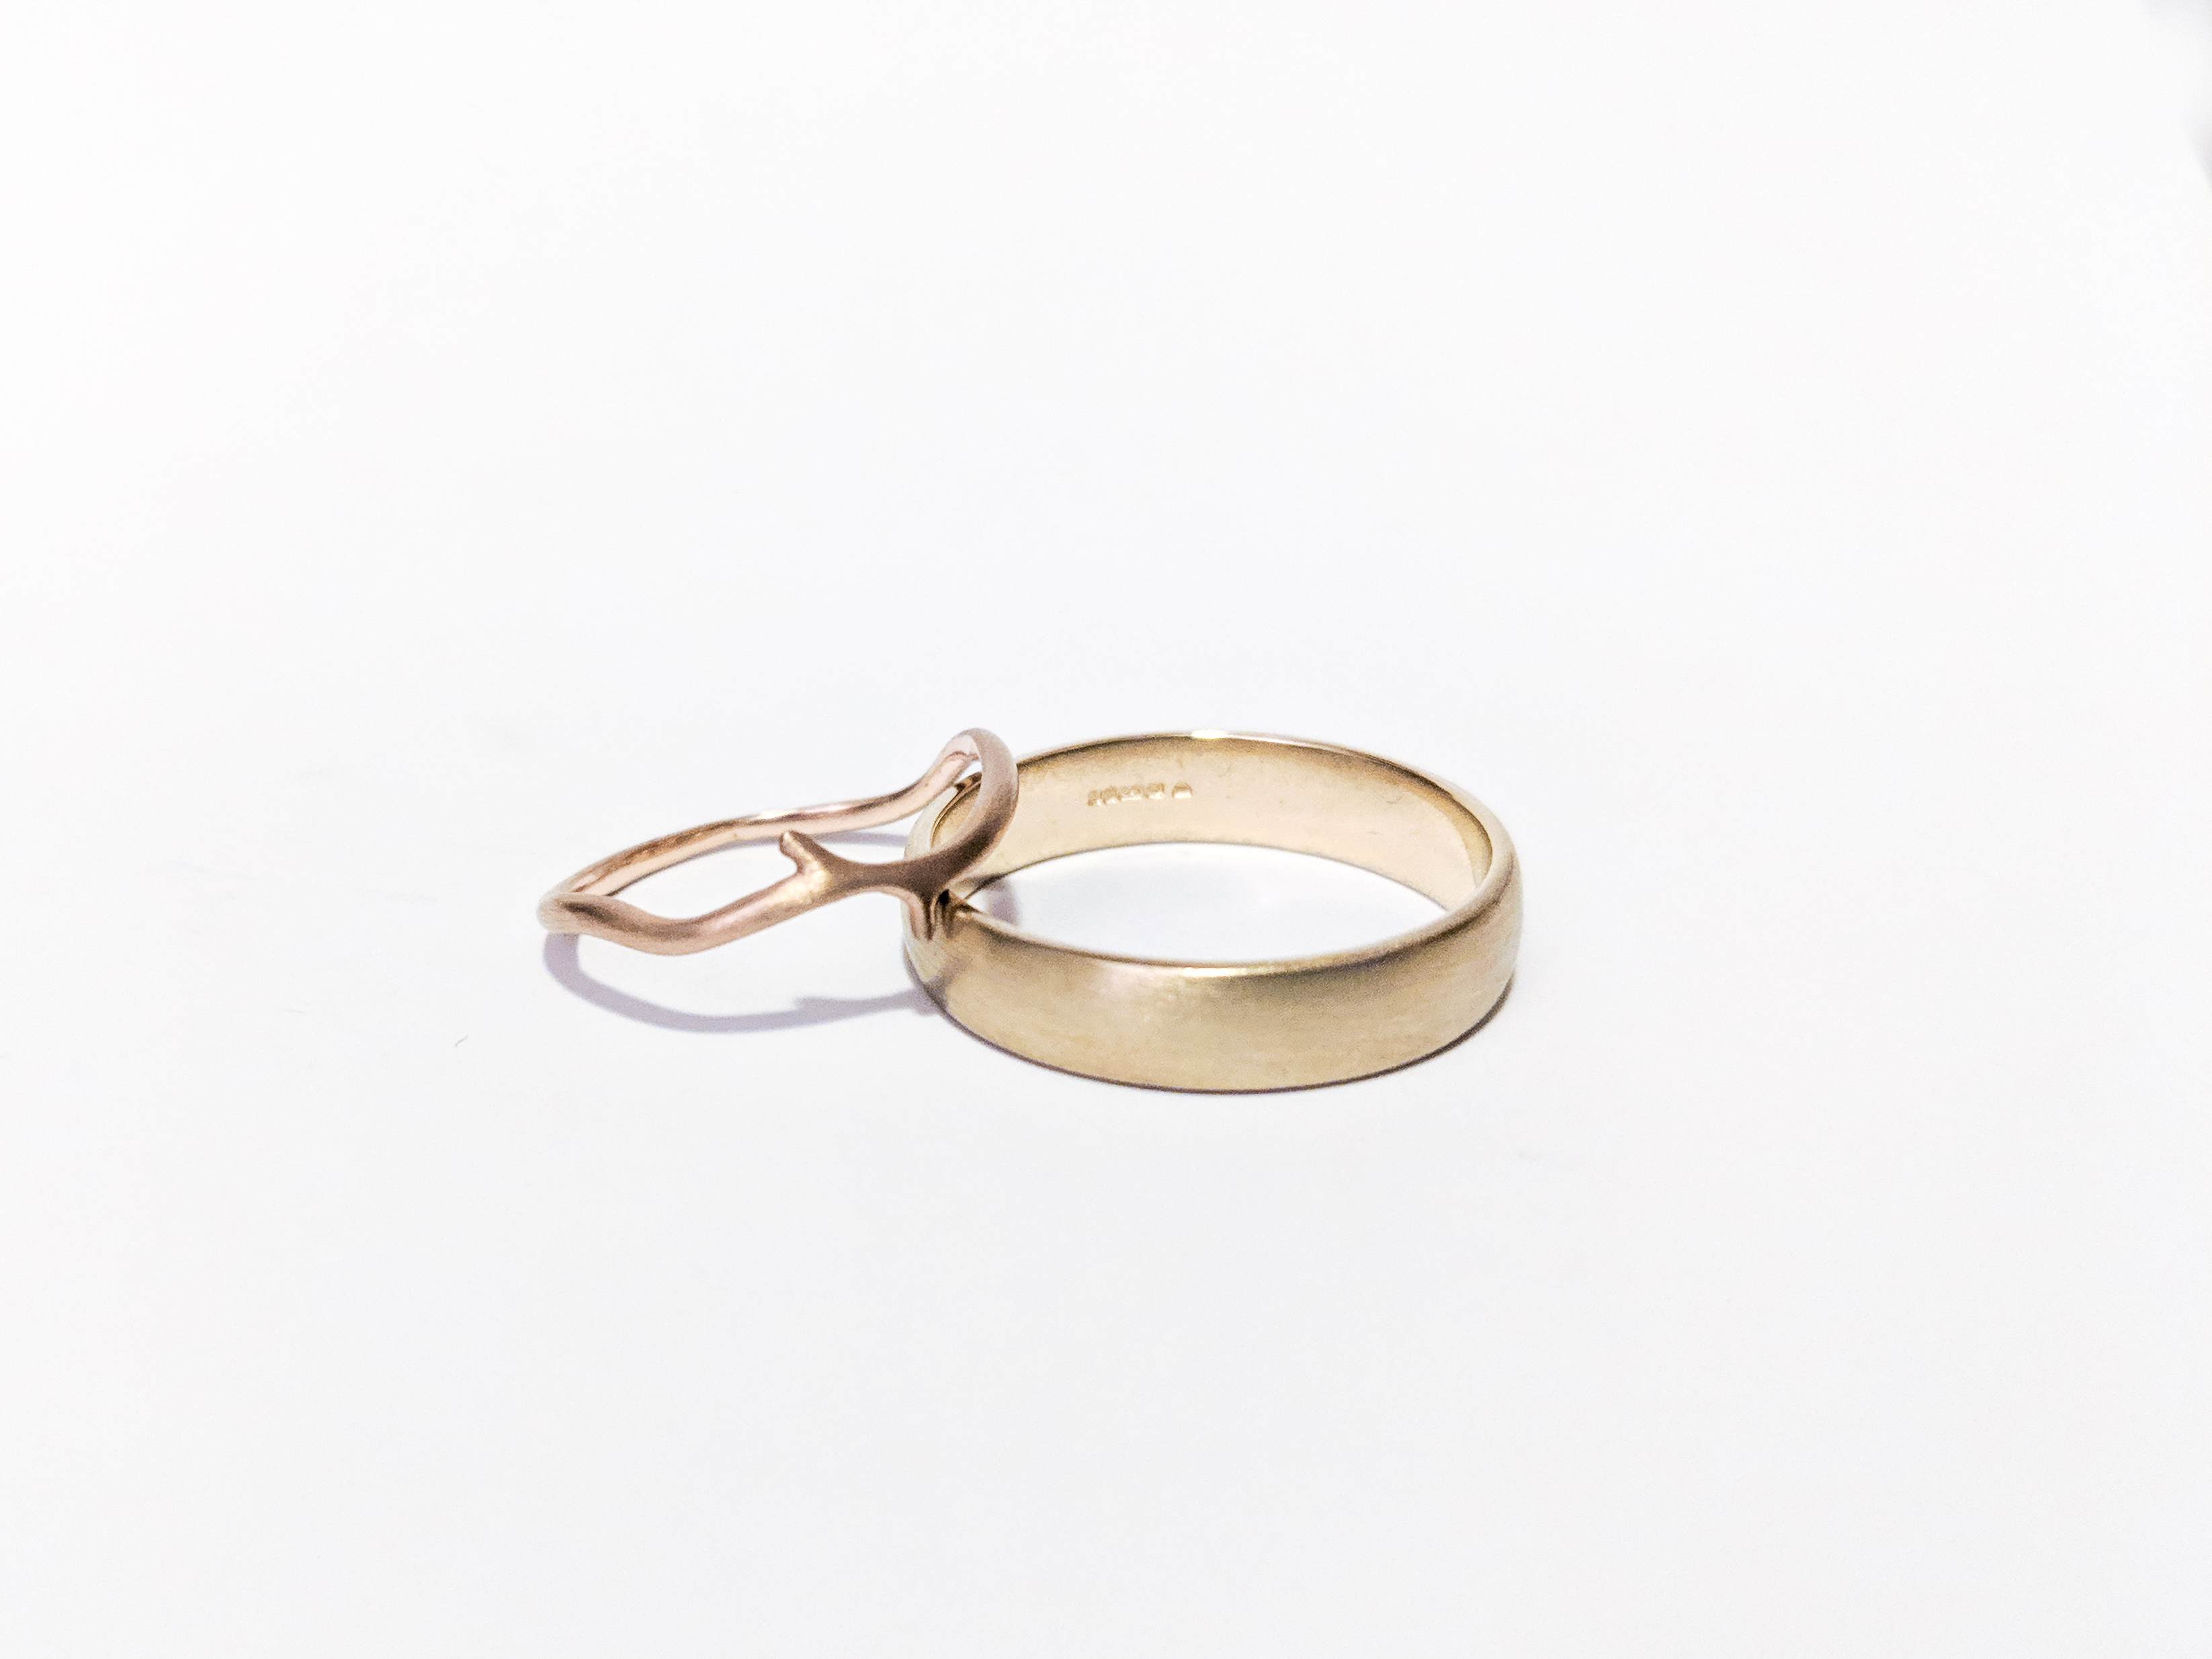 9CT RECYCLED YELLOW & ROSE GOLD WEDDING RINGS